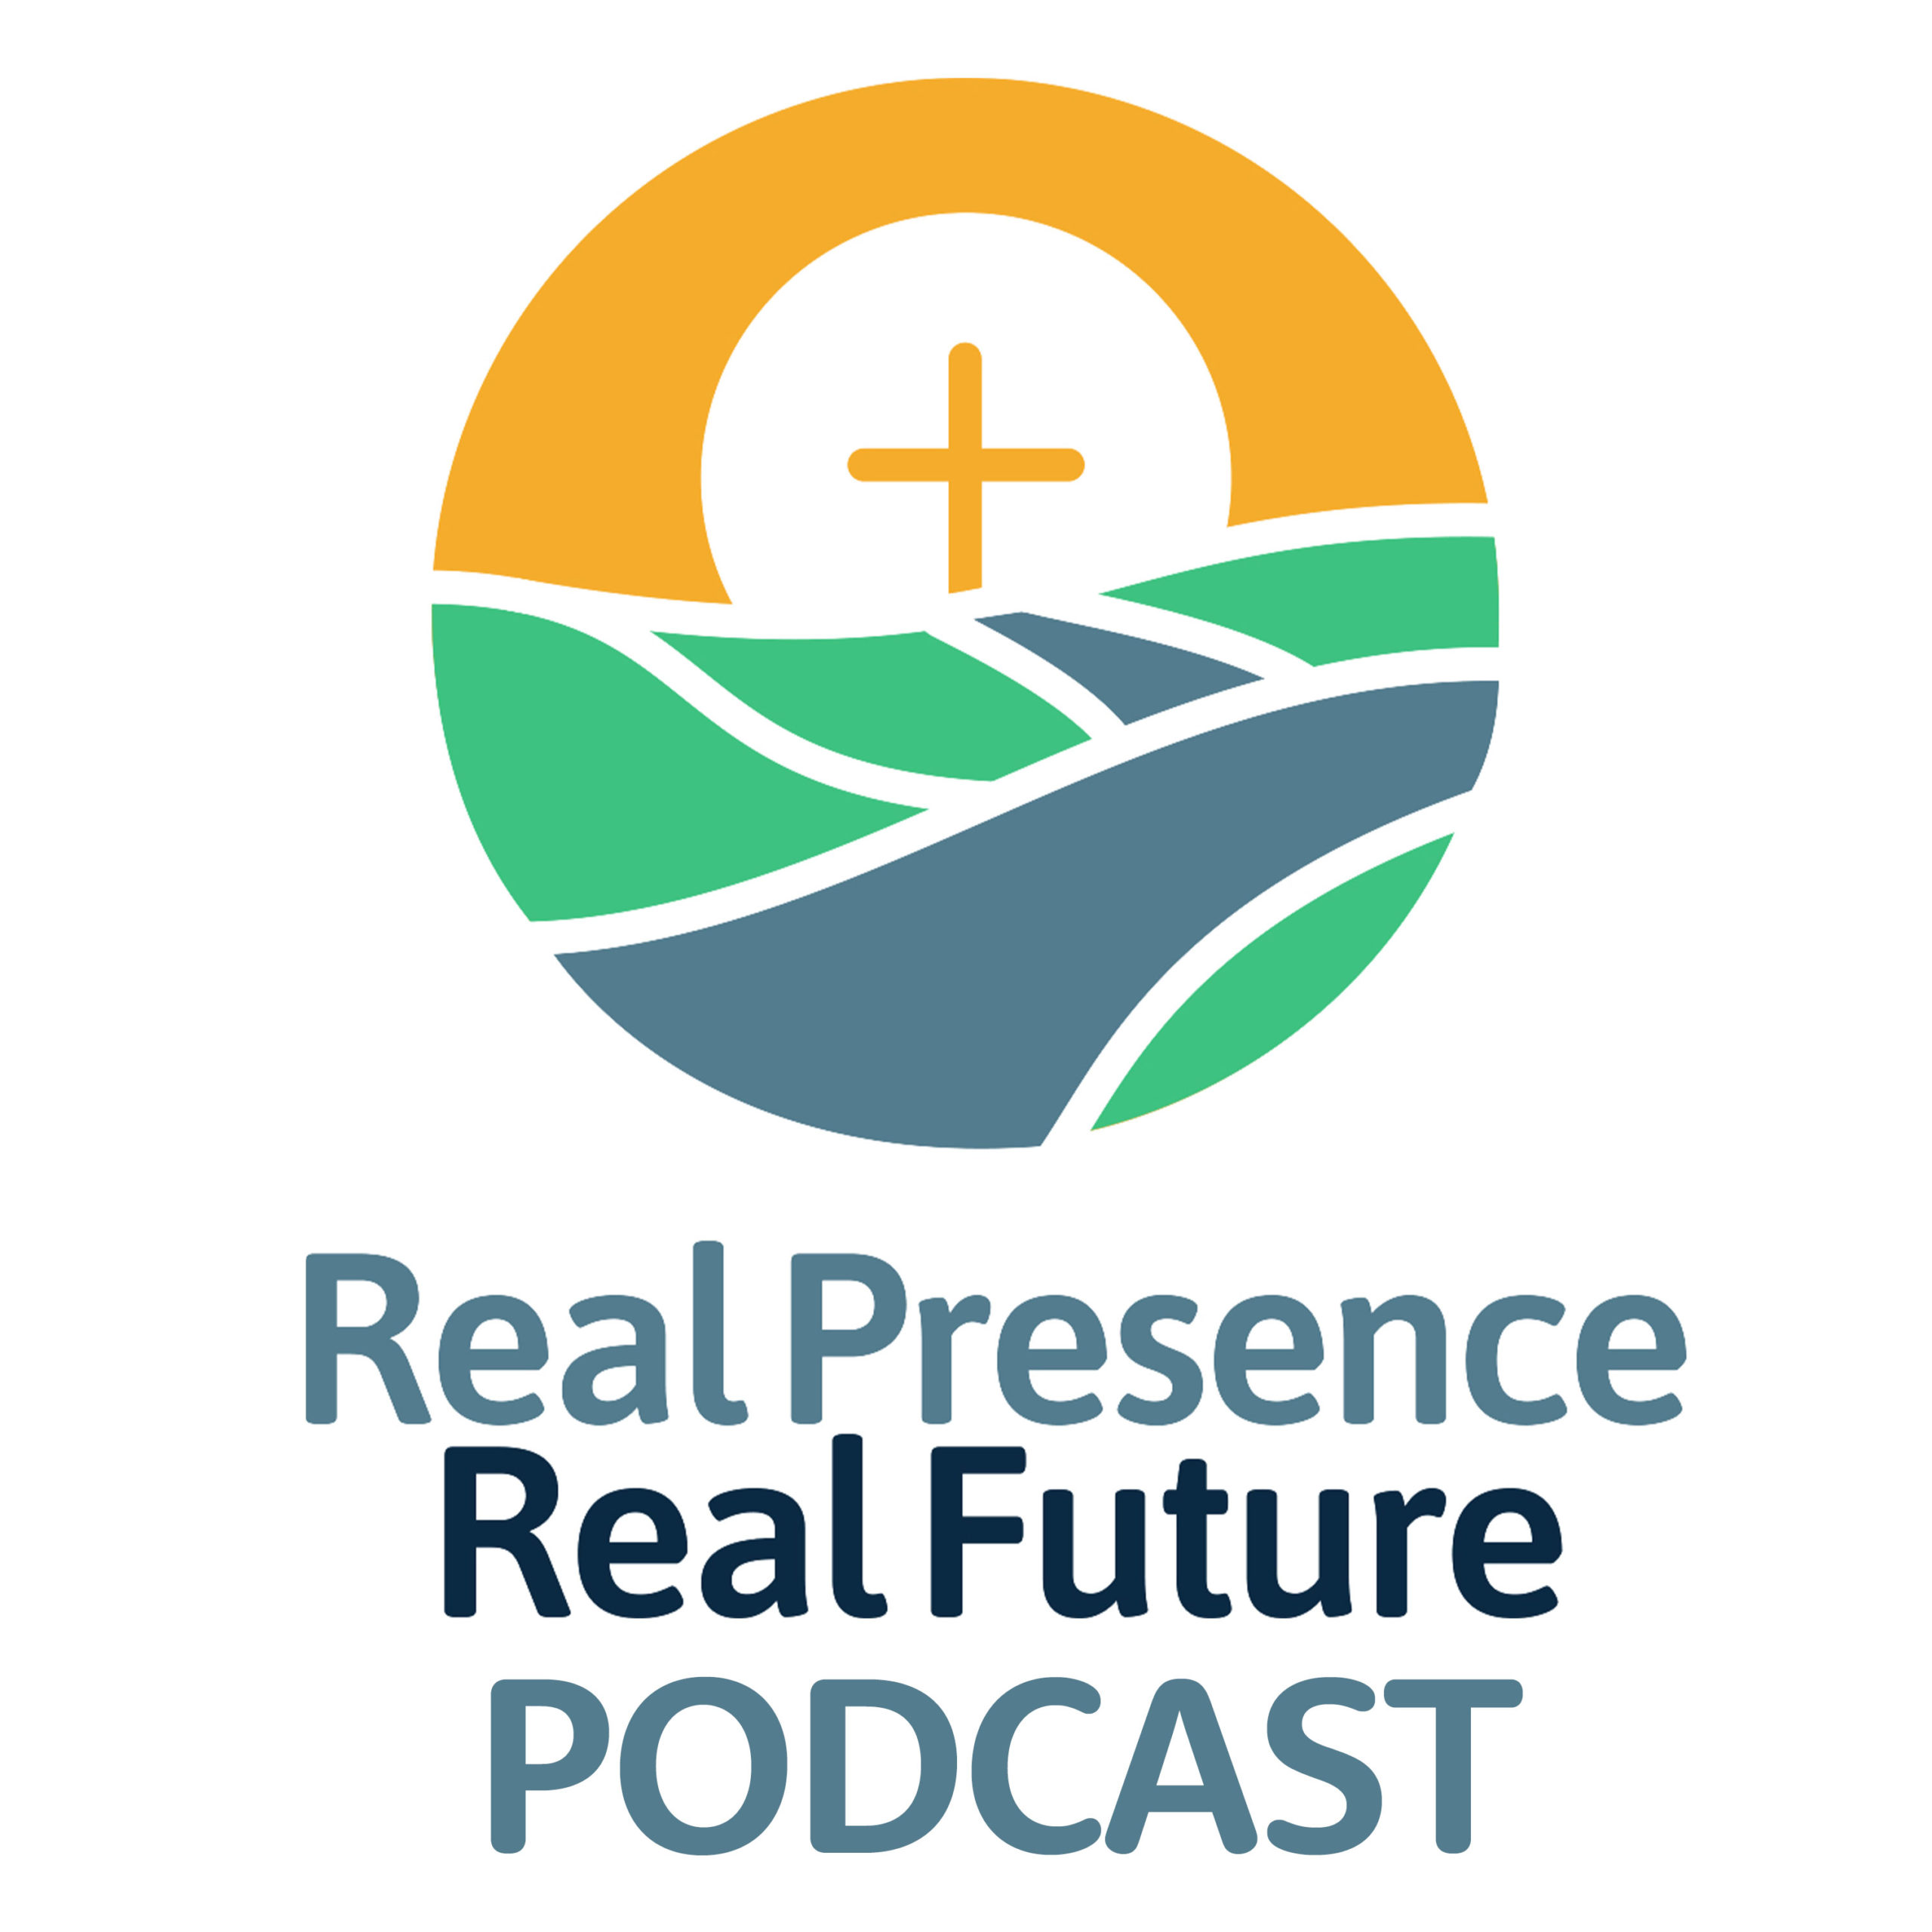 Real Presence Real Future Podcast